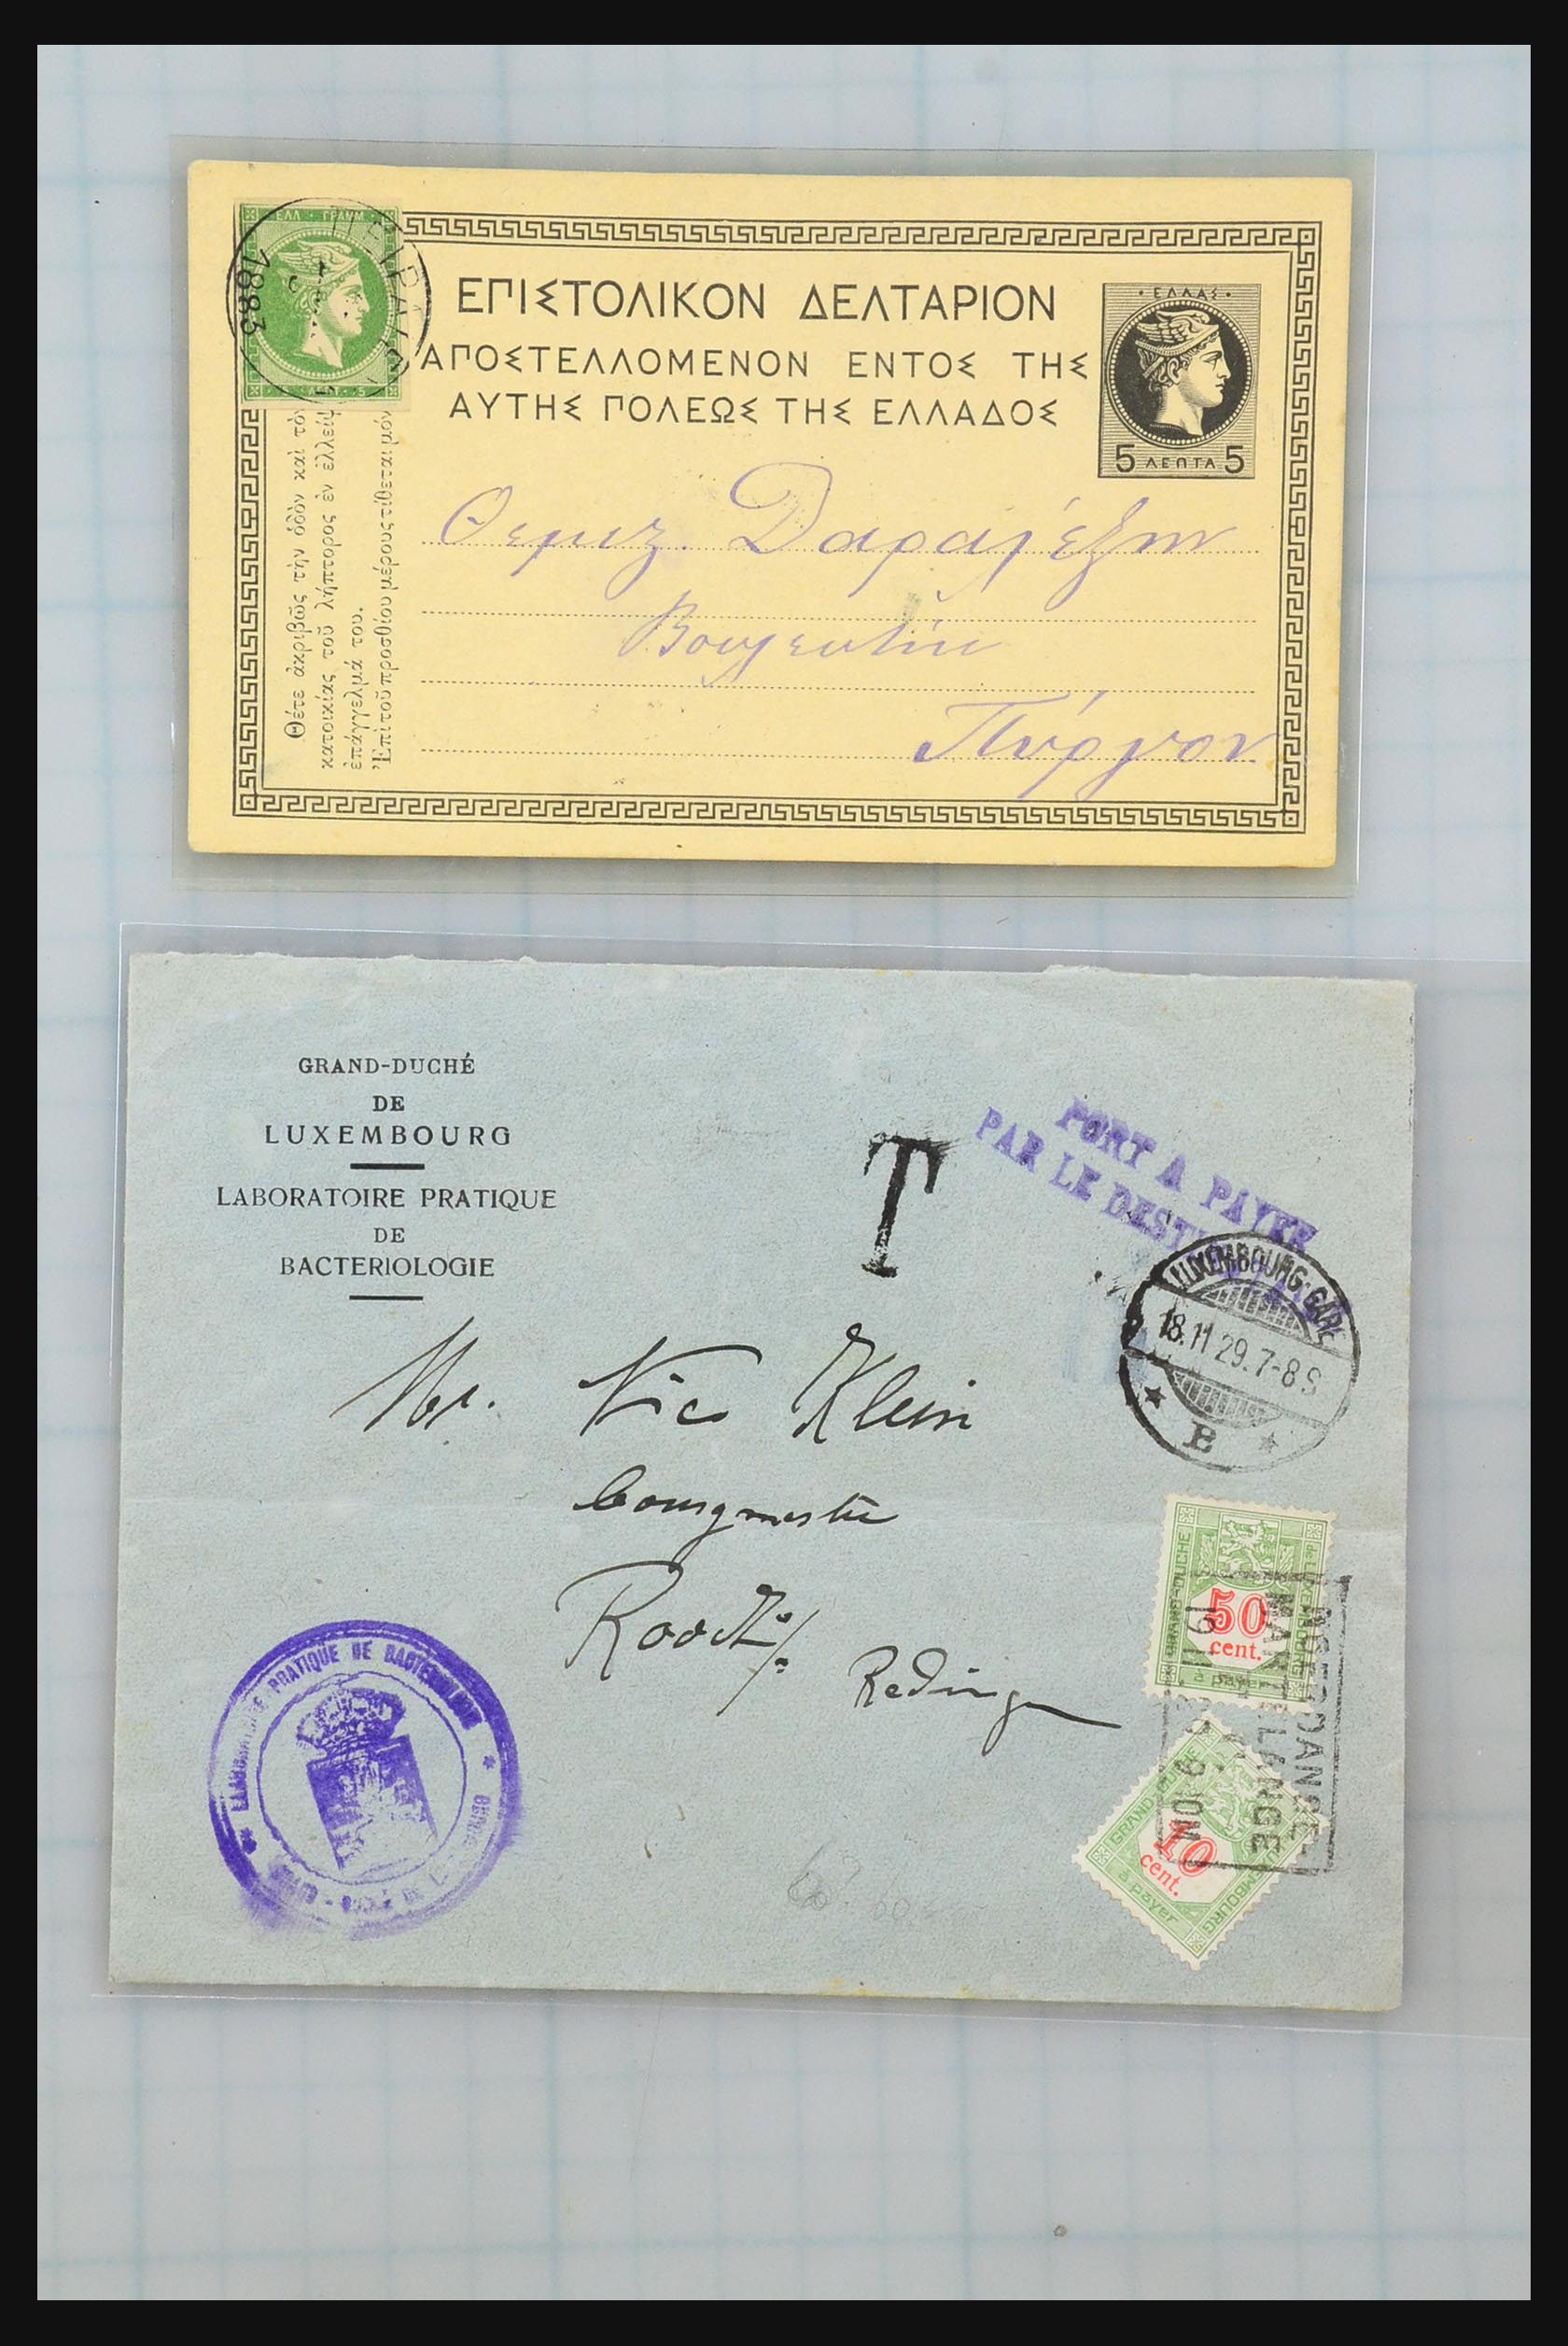 31358 043 - 31358 Portugal/Luxemburg/Greece covers 1880-1960.